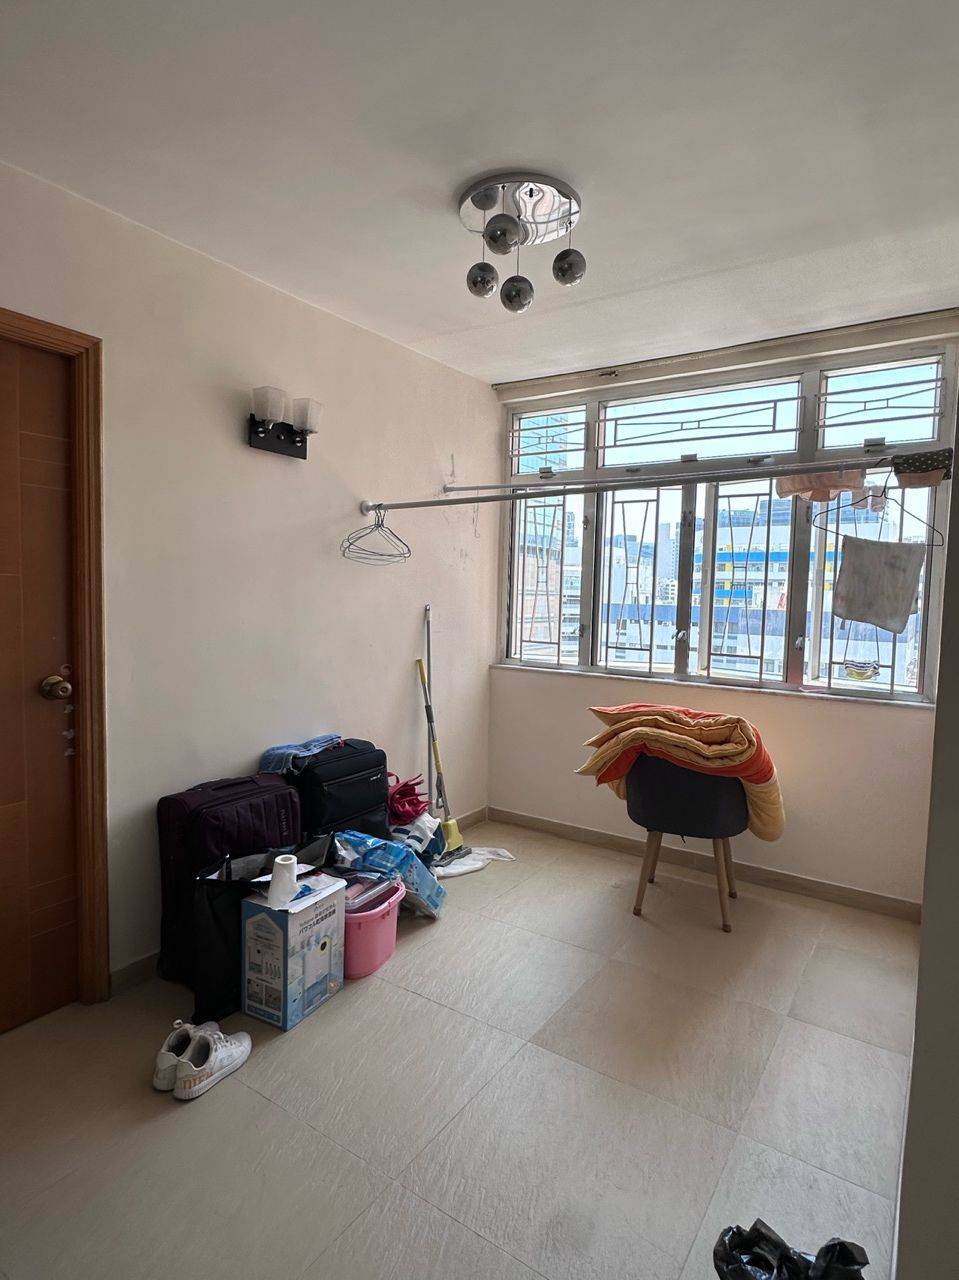 Hong Kong-Kowloon-Cozy Home,Clean&Comfy,No Gender Limit,Hustle & Bustle